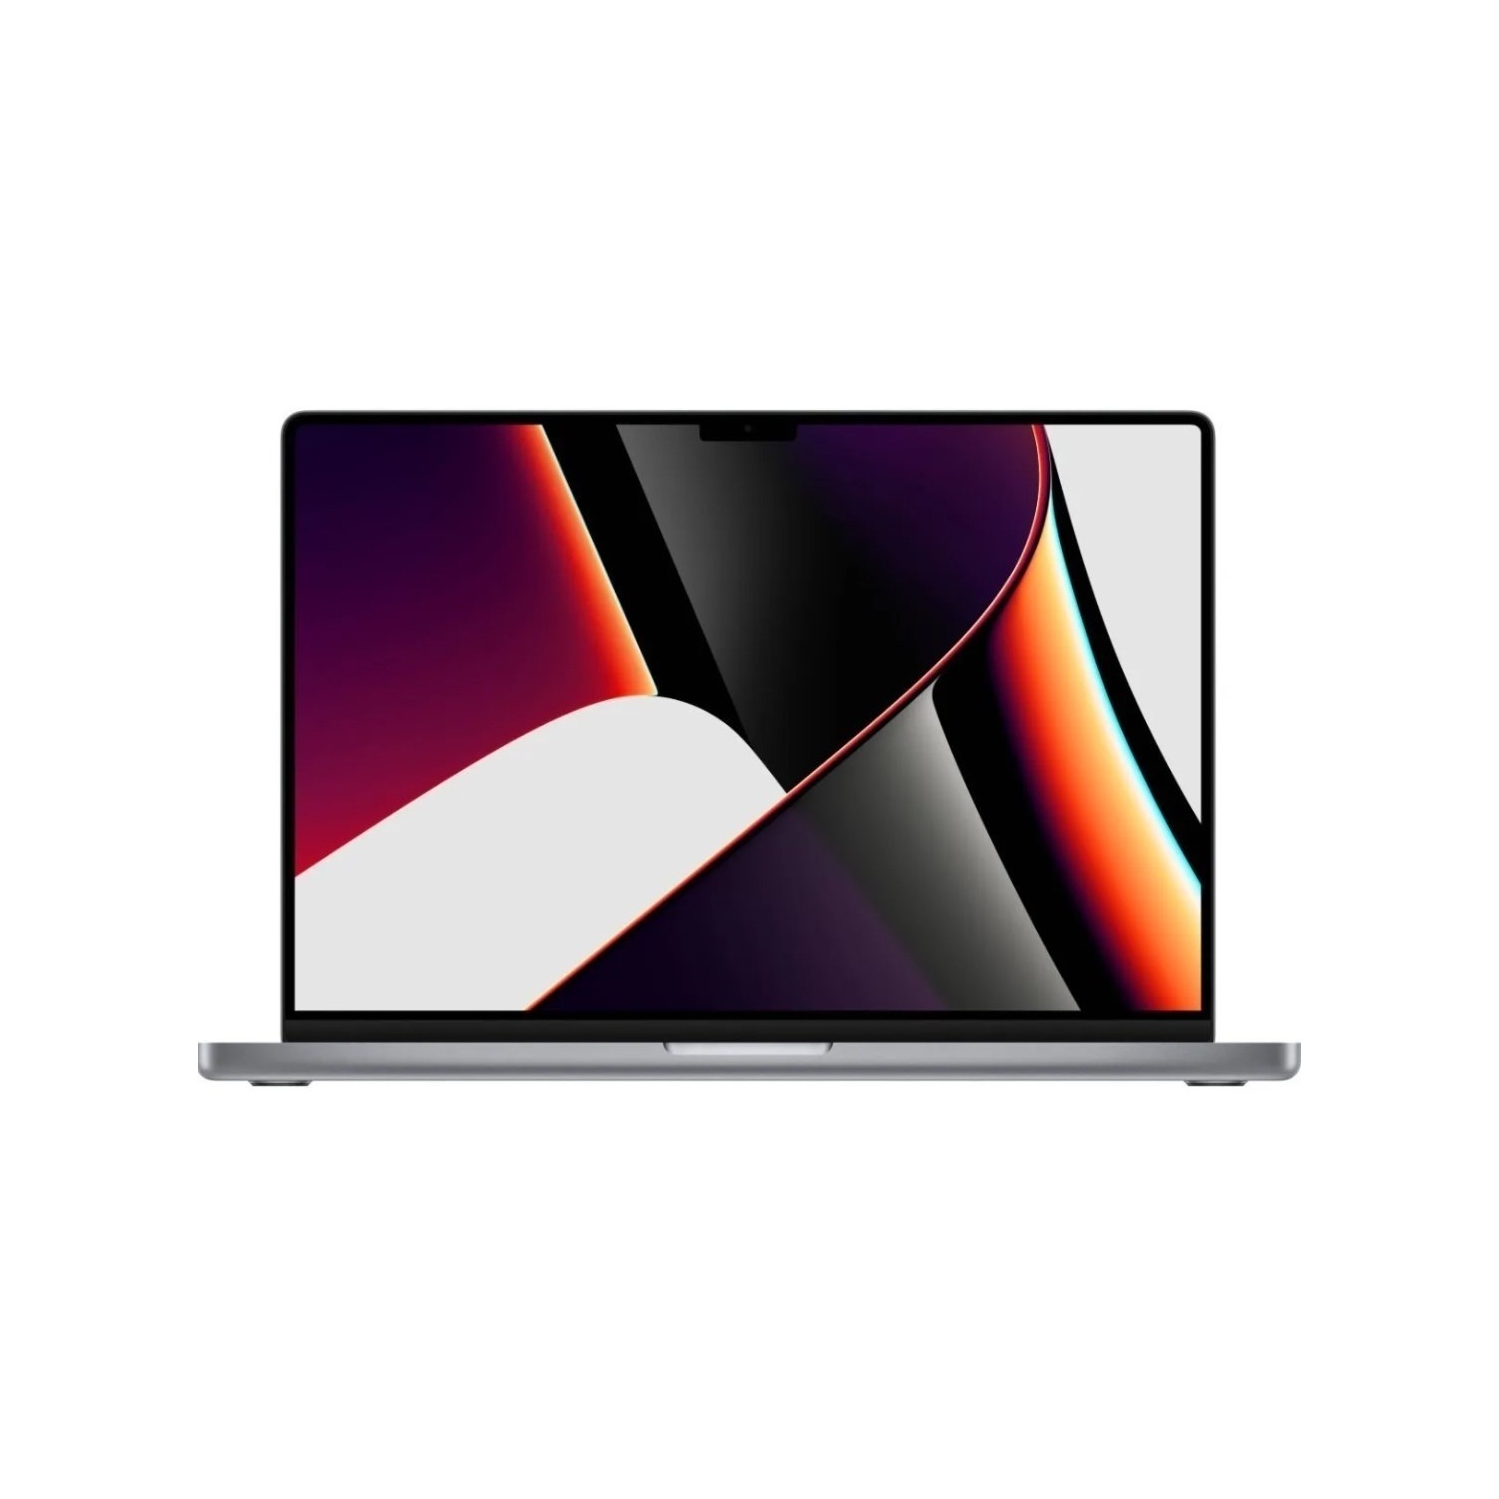 Refurbished(Excellent) - Apple MacBook Pro 16" (2021) - Space Grey (Apple M1 Max Chip / 1TB SSD / 64GB RAM) - English[Like New]